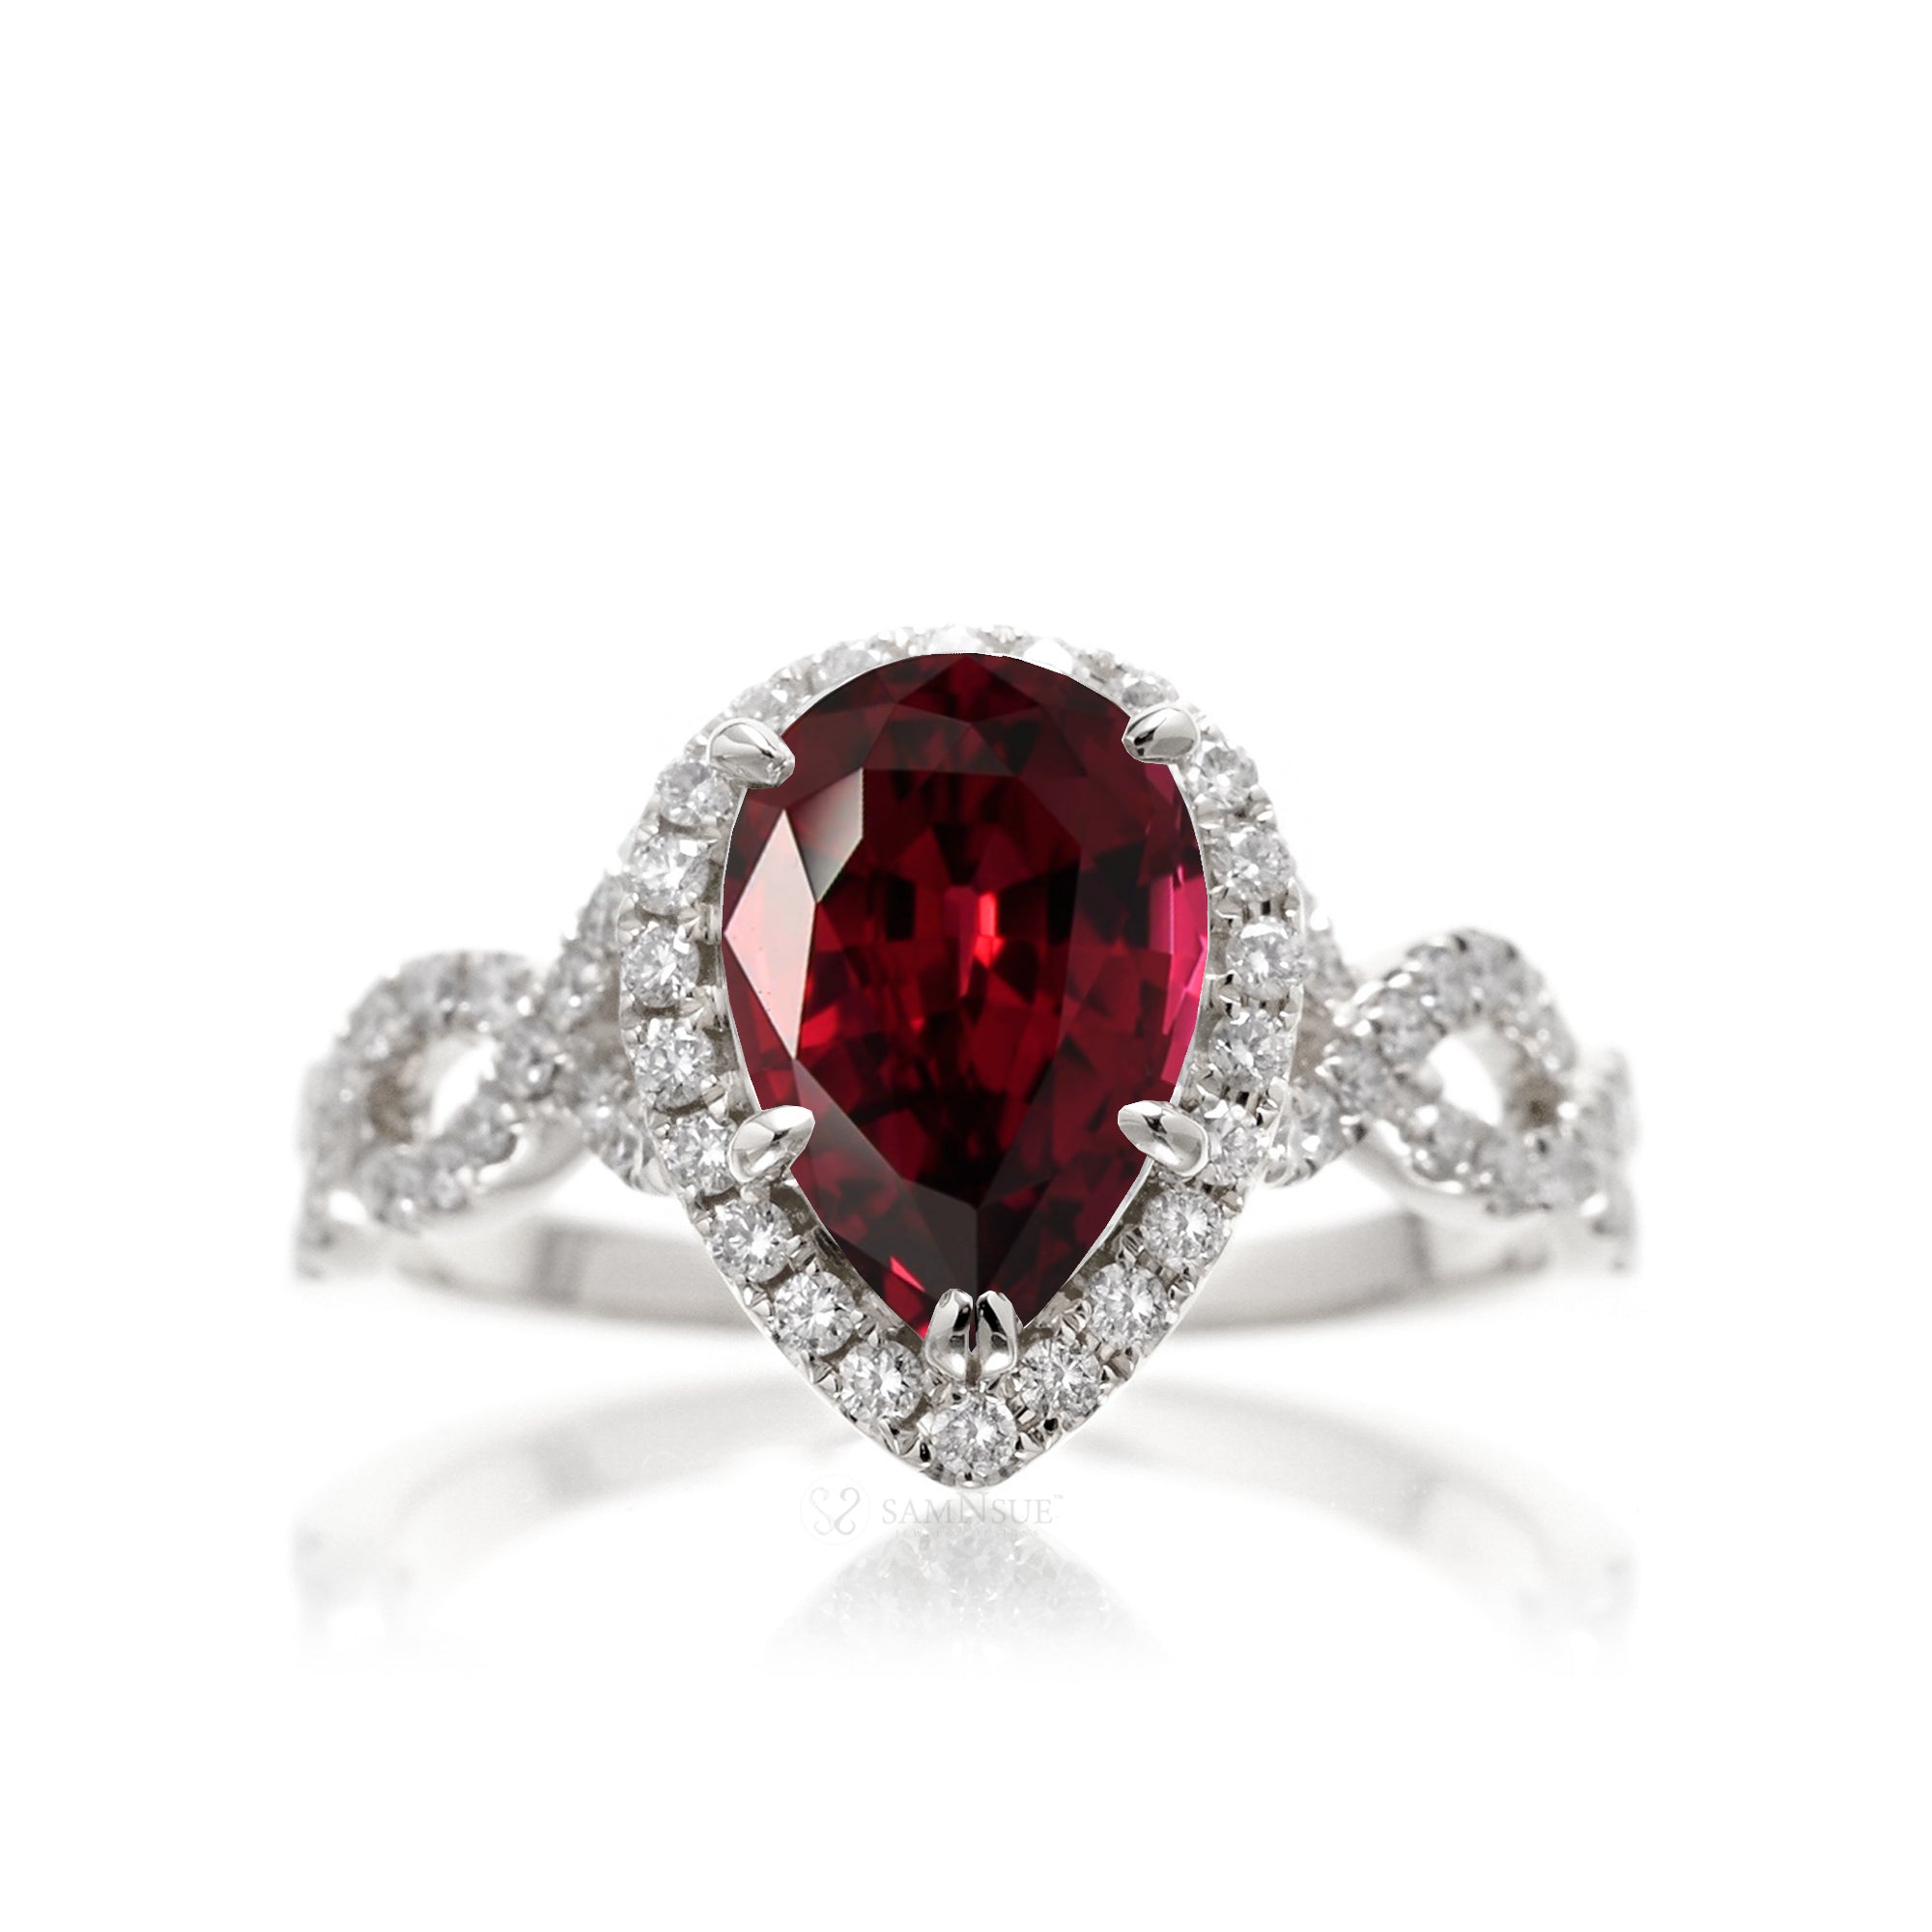 Unique Pear Shaped Ruby Accent Ring | Barkev's